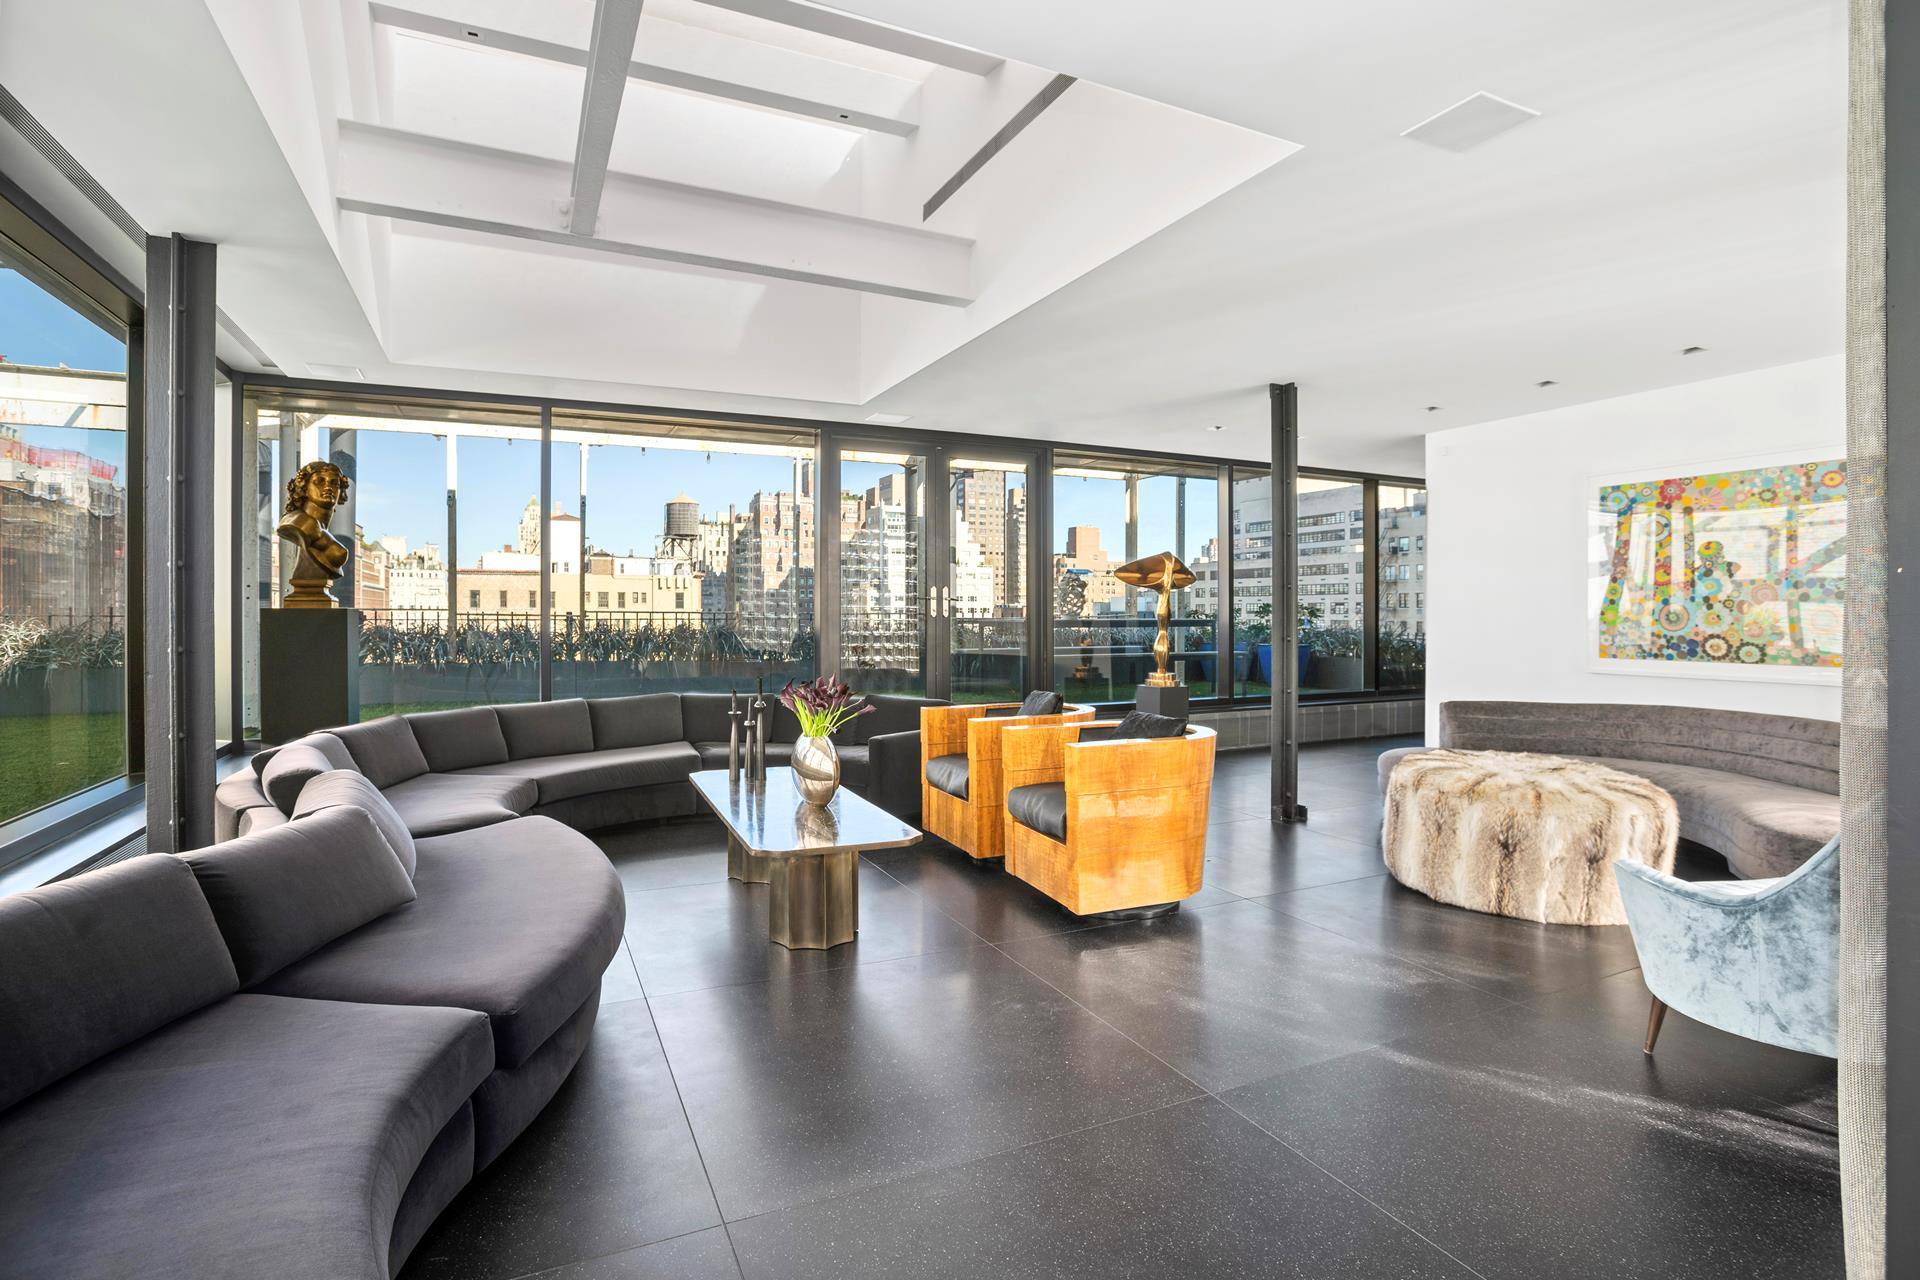 JUST REDUCED ! Magnificent, modern penthouse set atop one of the finest co ops on The Upper East Side.